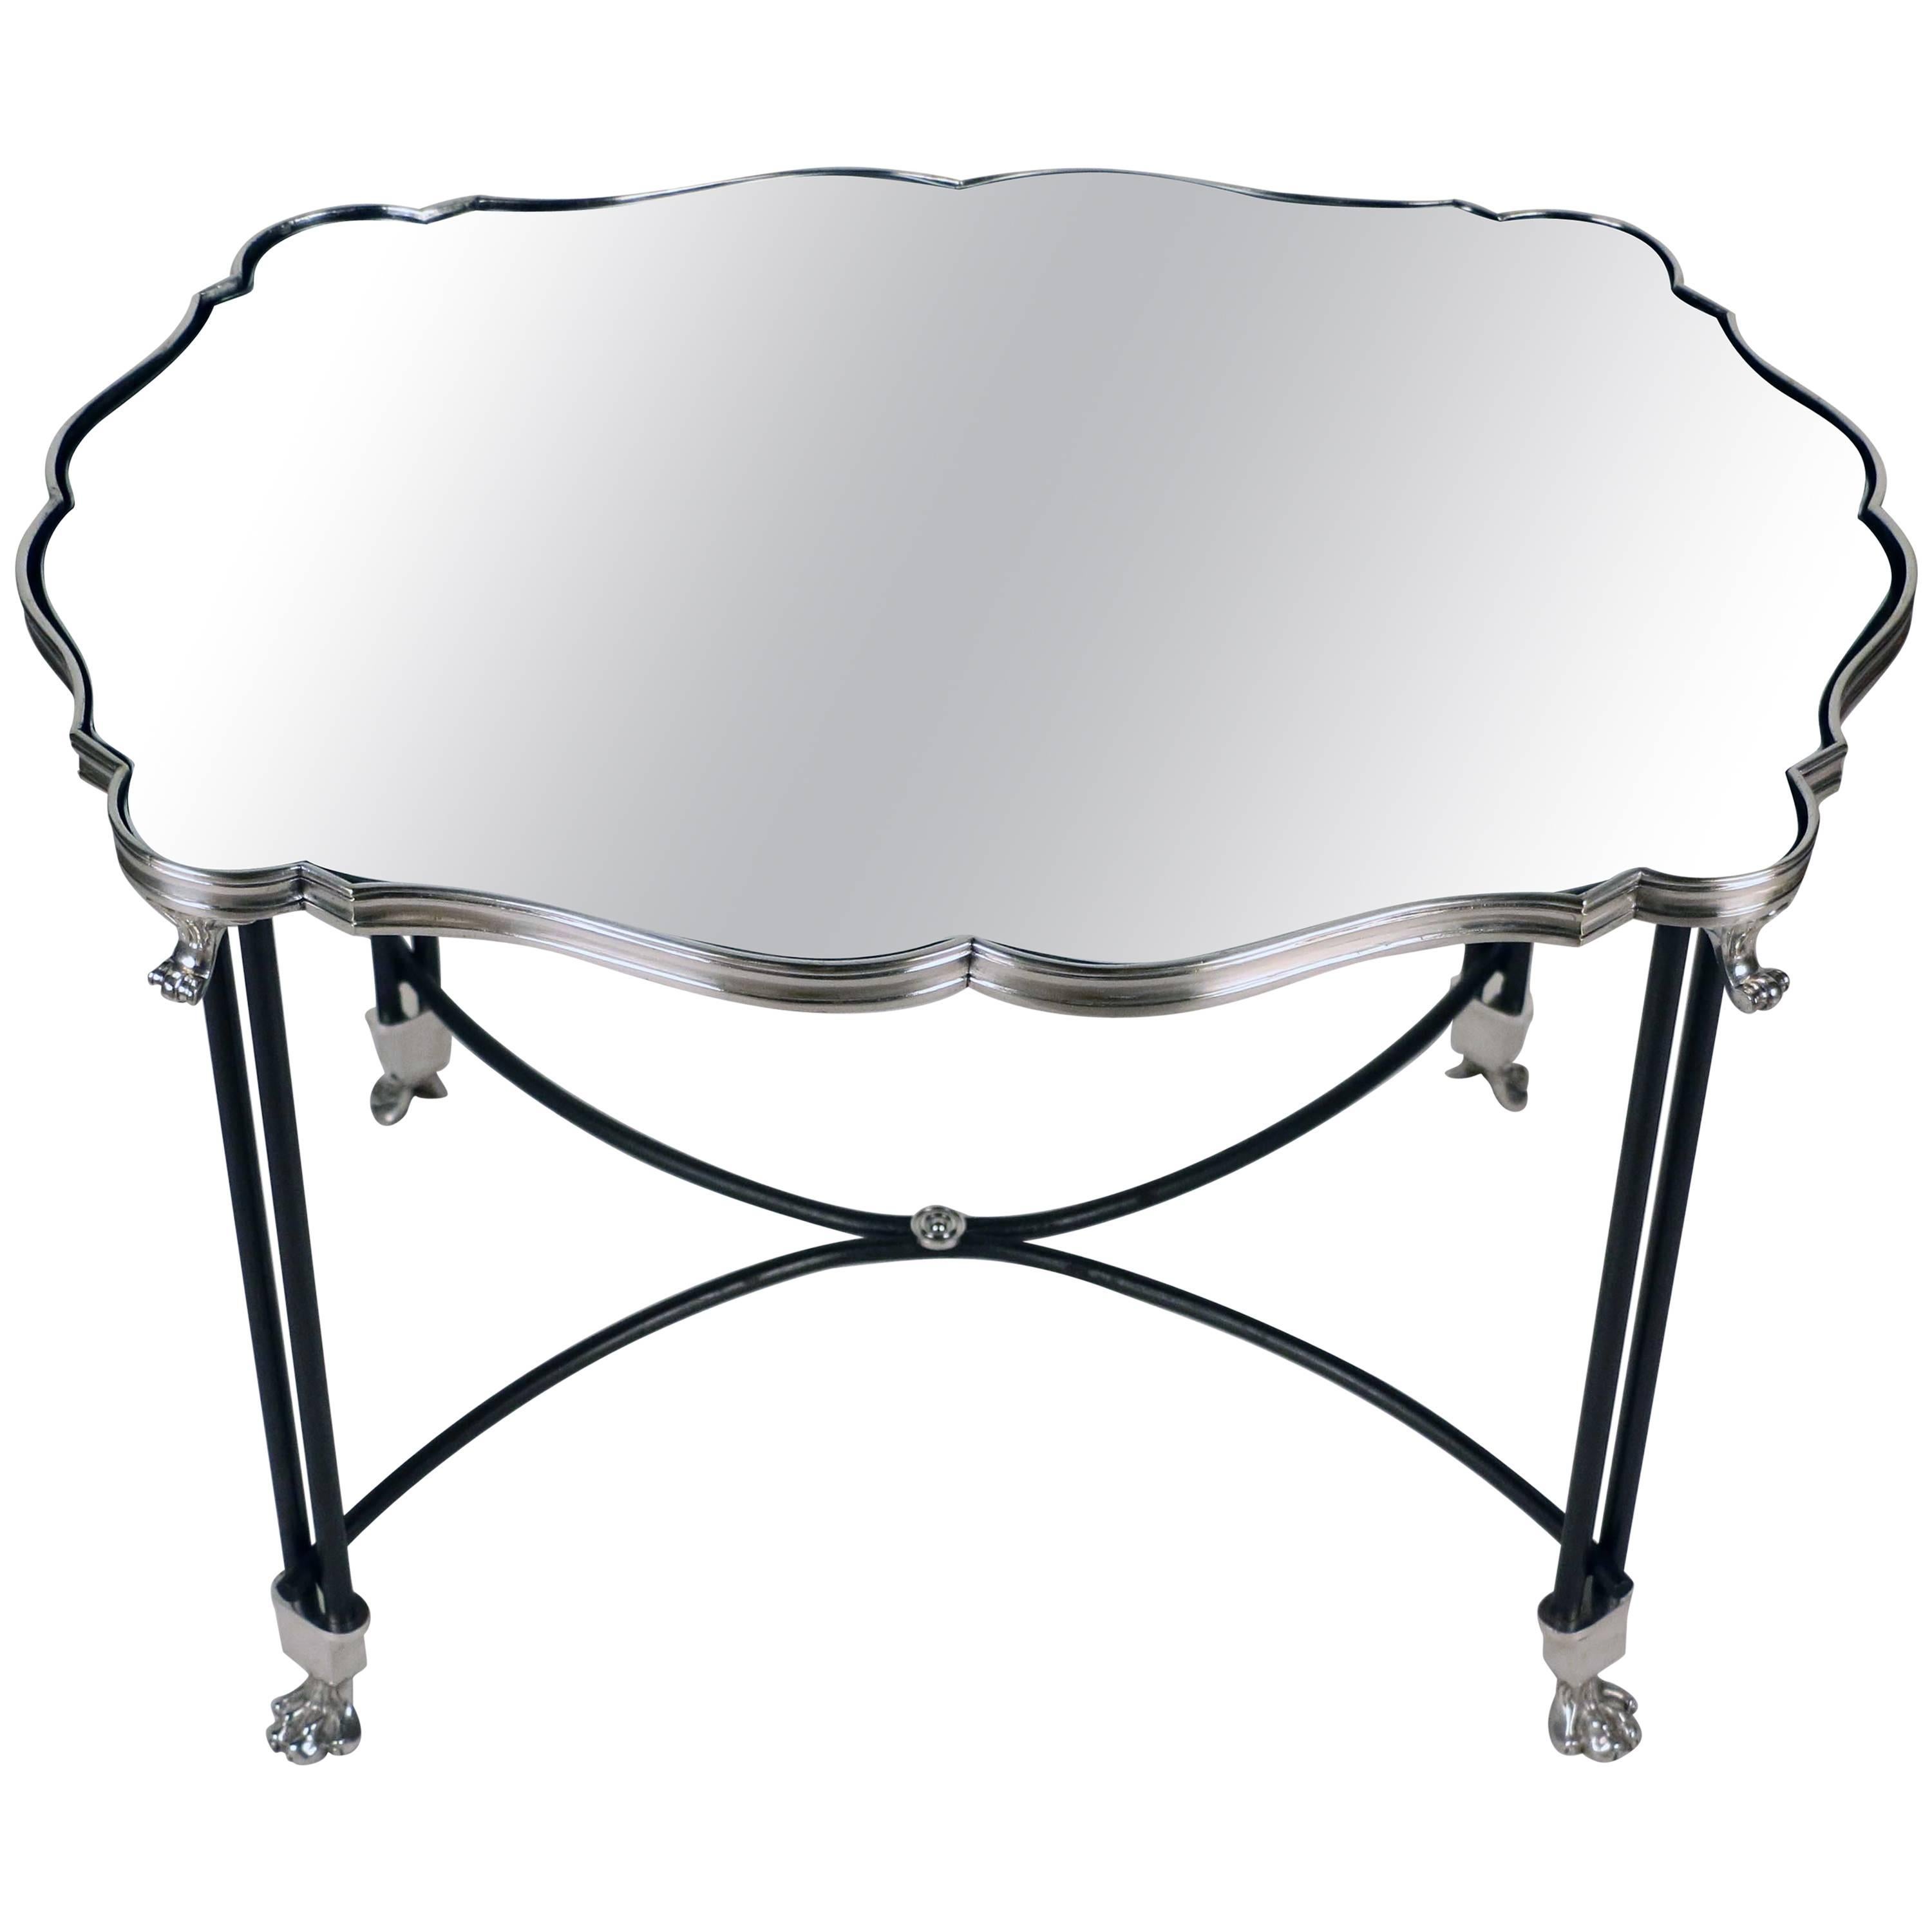 Antique French Mirrored Surtout de Table Now Mounted as a Low Table